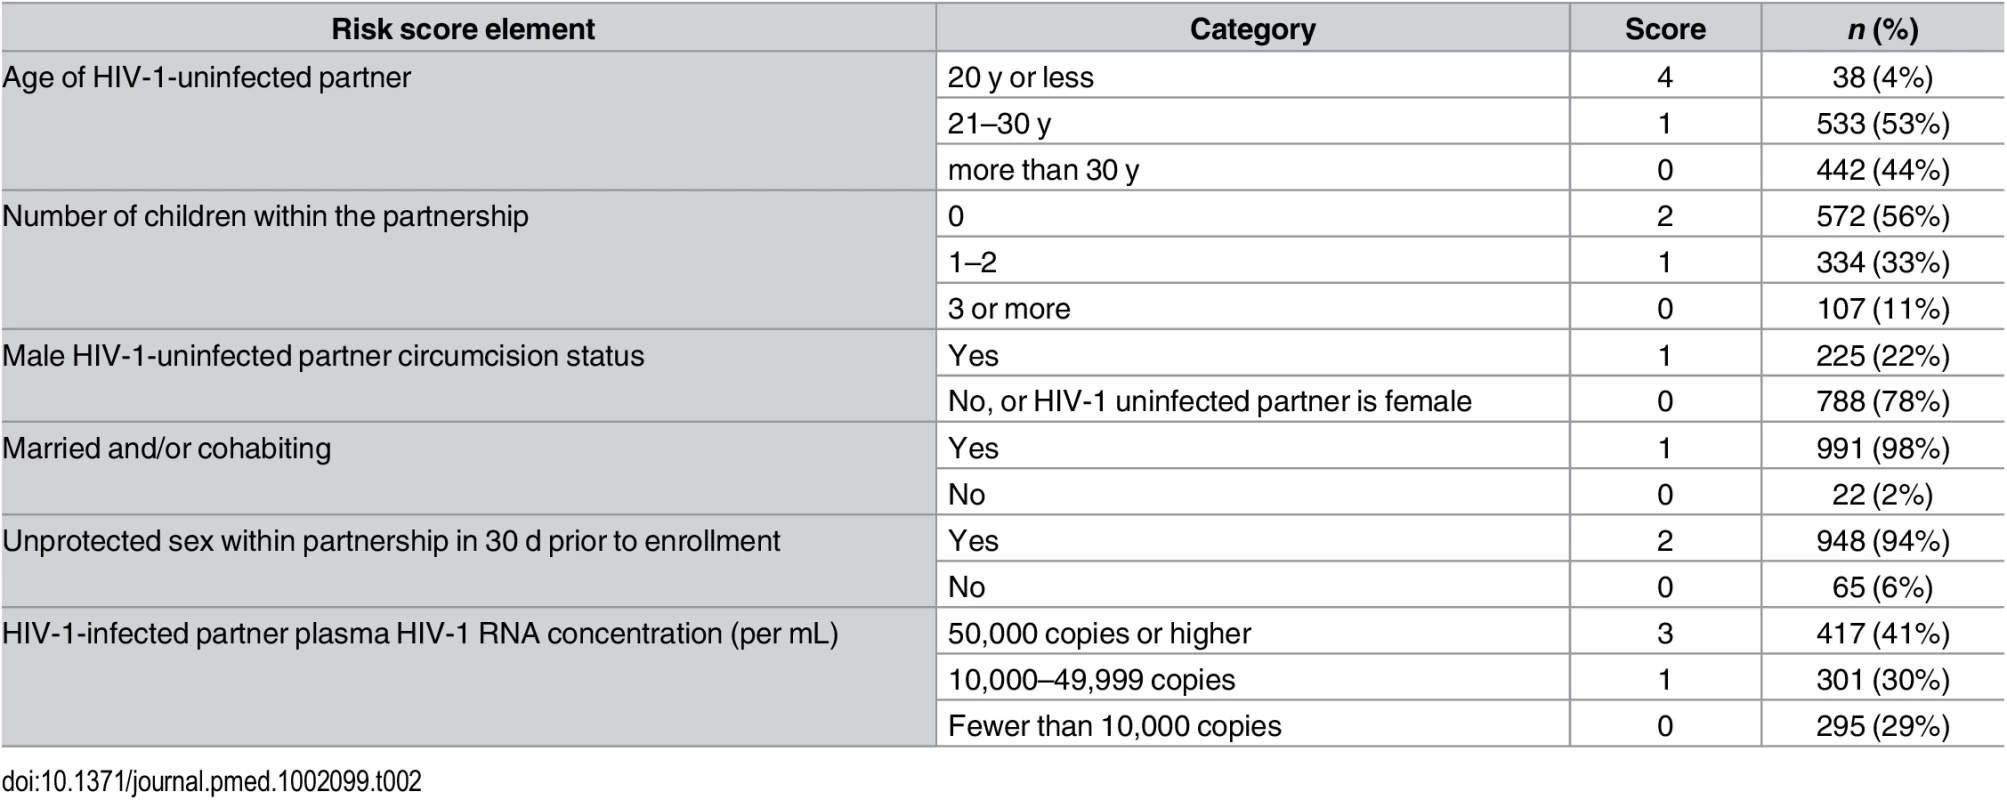 Distribution of components of the couples’ HIV-1 empiric risk score.